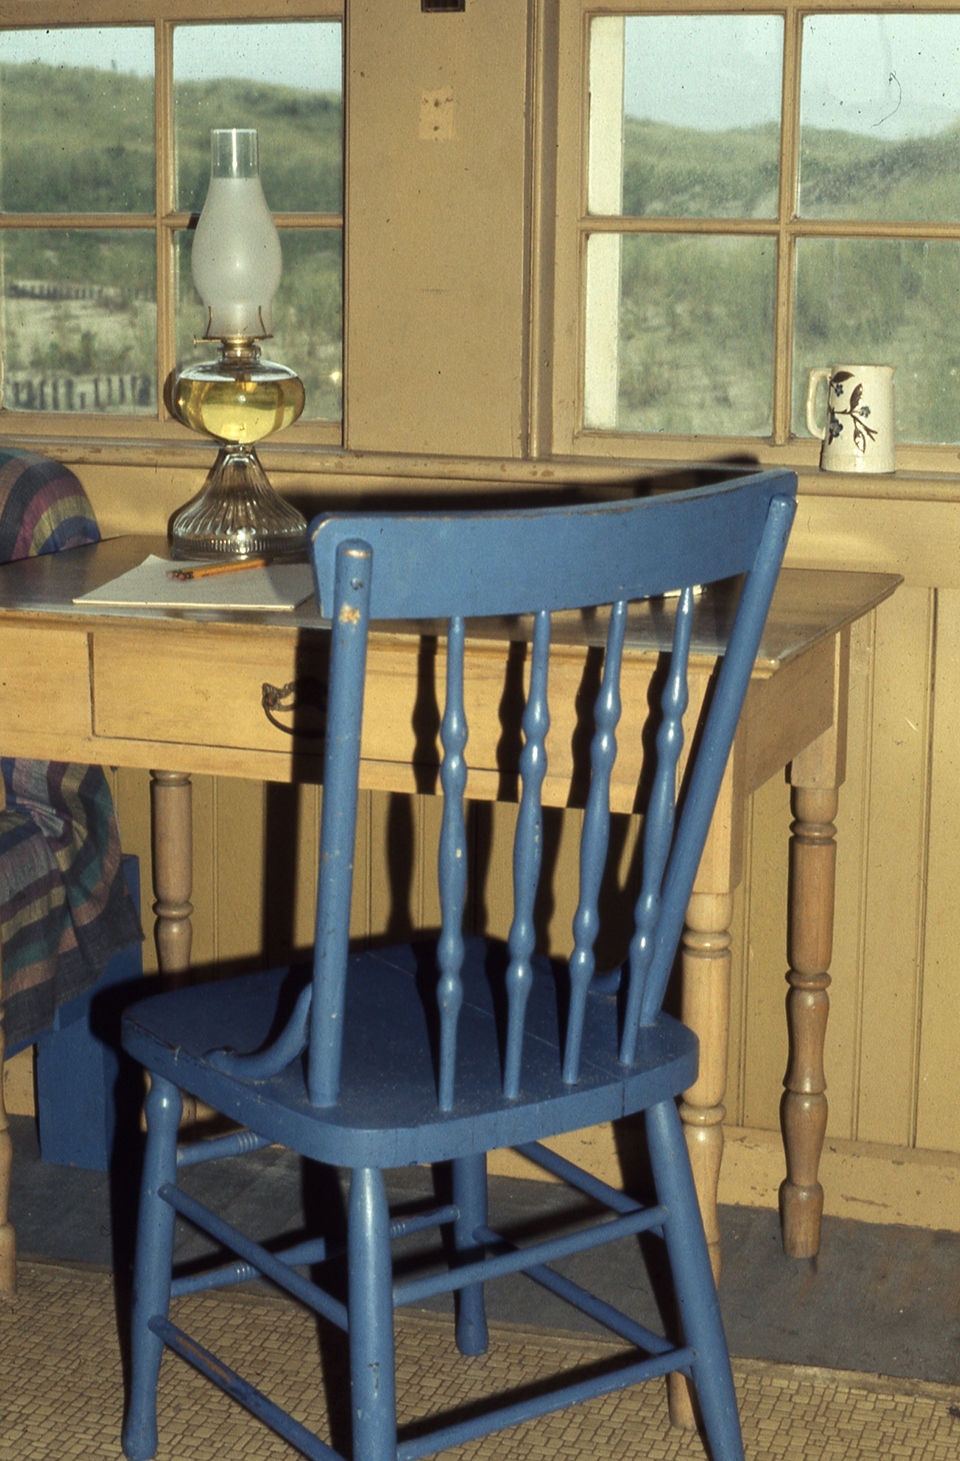 A chair sits at a small wooden table with a lamp on it. Behind the table is a window looking out to grassy dunes.